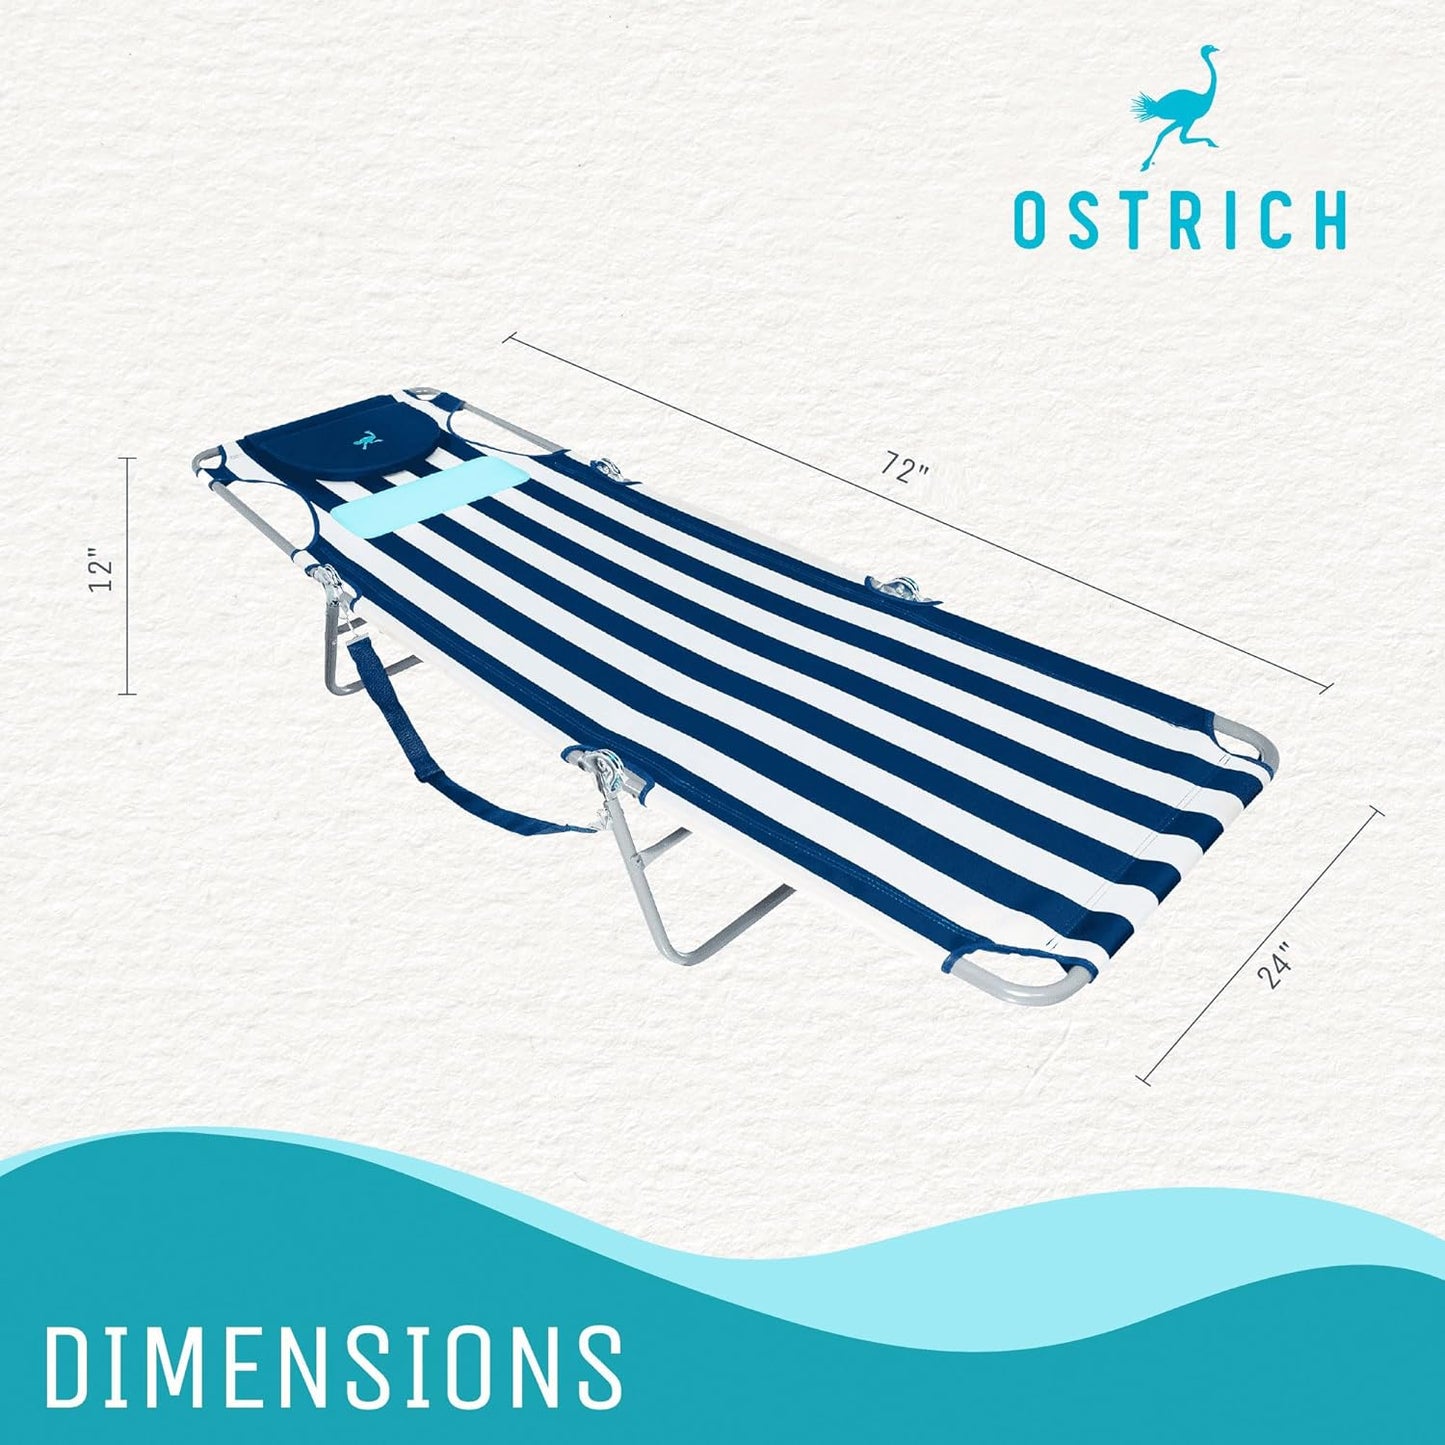 NEW - Ostrich LCL-1006S LCL Ladies Comfort Lounger For Sunbathing With Arm Rest, Foldable, Blue and White Striped, 72 in. L x 24 in. W x 12 in. H - Retail $74